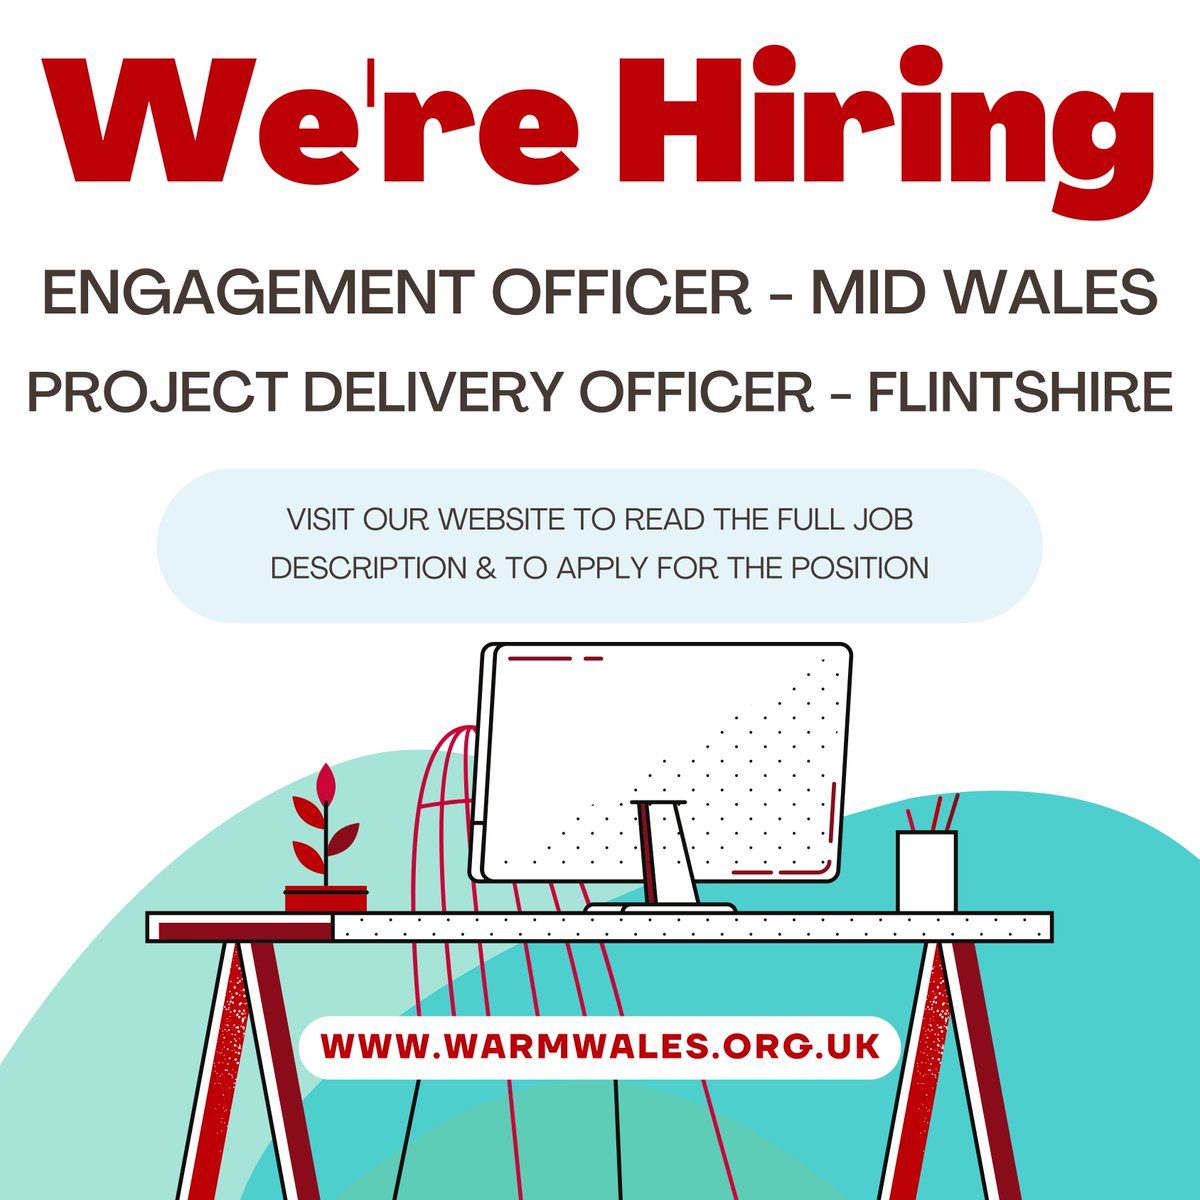 We are hiring... Engagement officer - Mid wales - Hybrid Project delivery officer - Flintshire - Remote Visit our website to read the full Job description & to apply 🤩 warmwales.org.uk/job-vacancies/